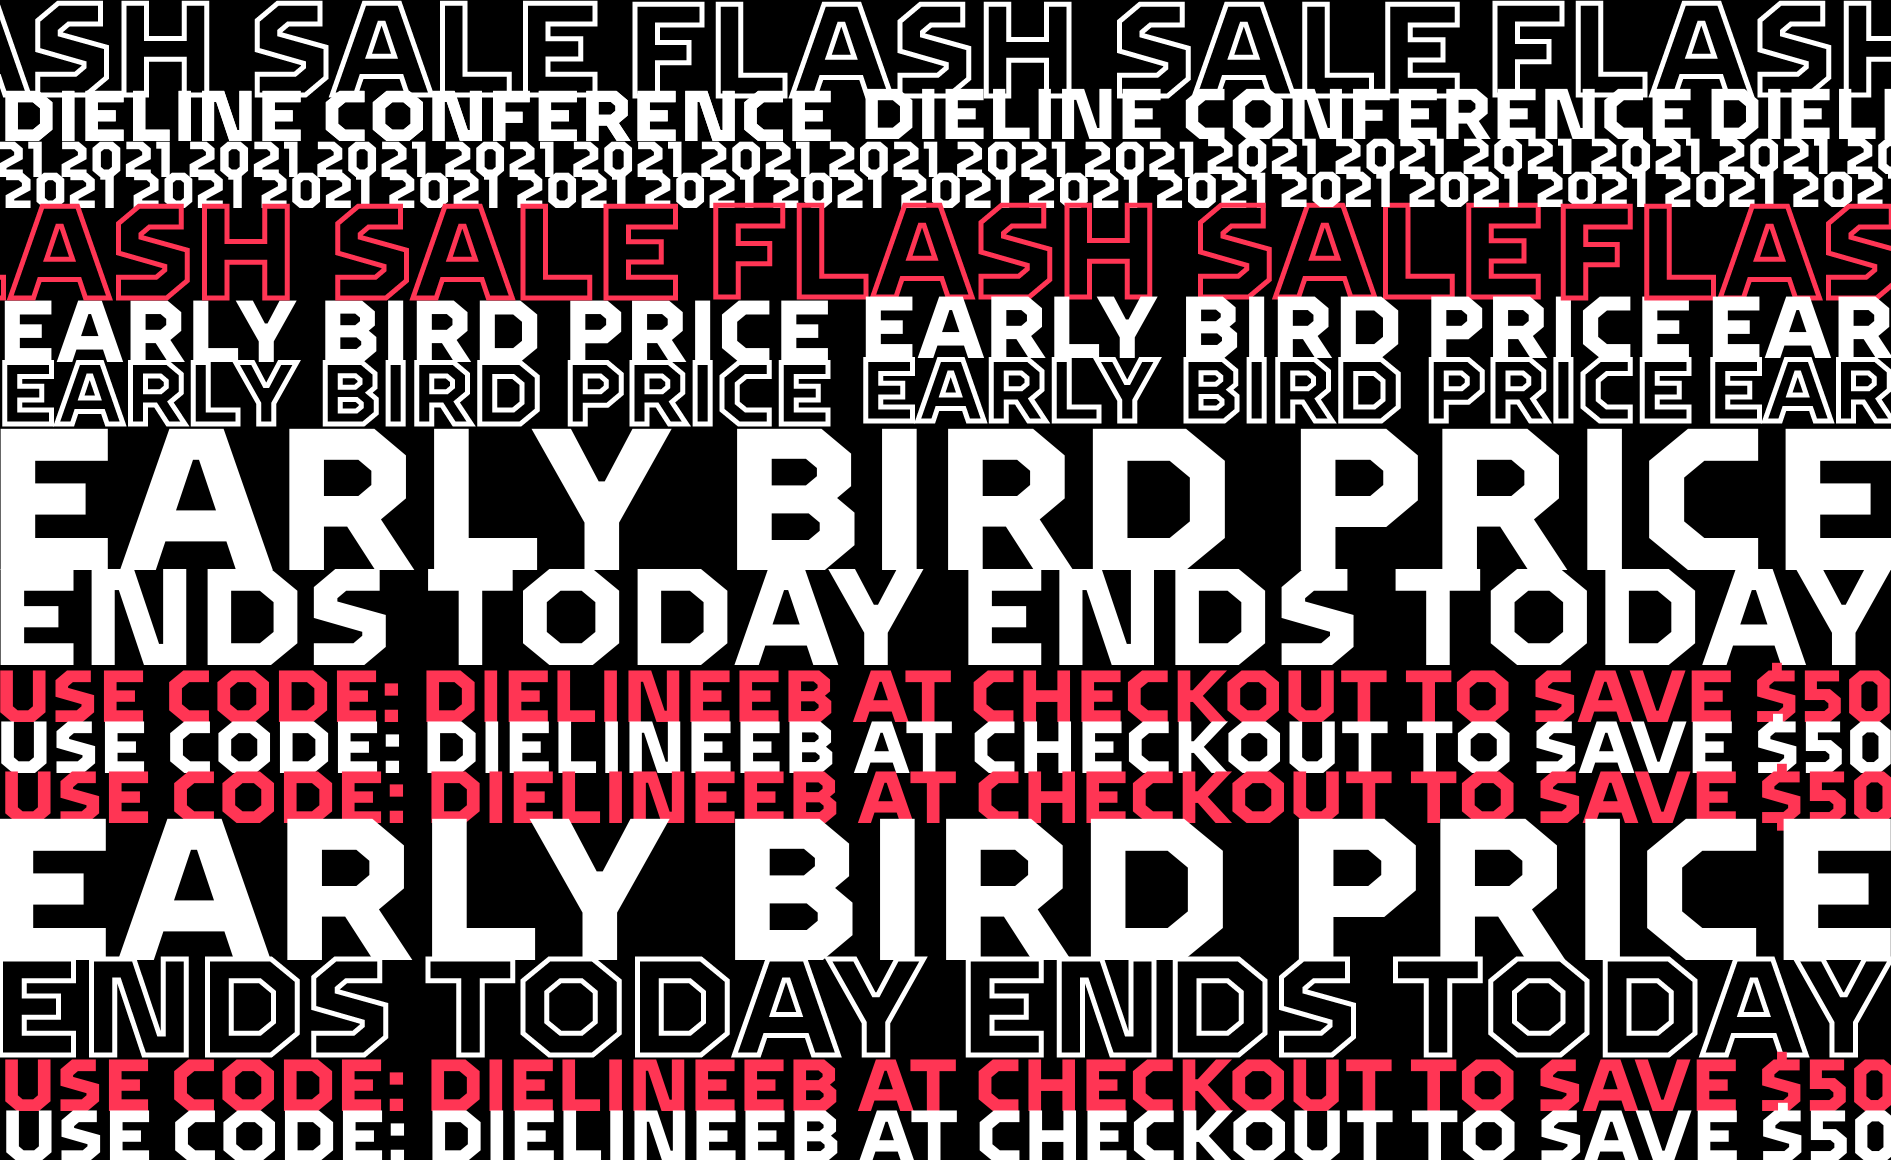 Dieline Conference 2021: LAST DAY TO SAVE $50